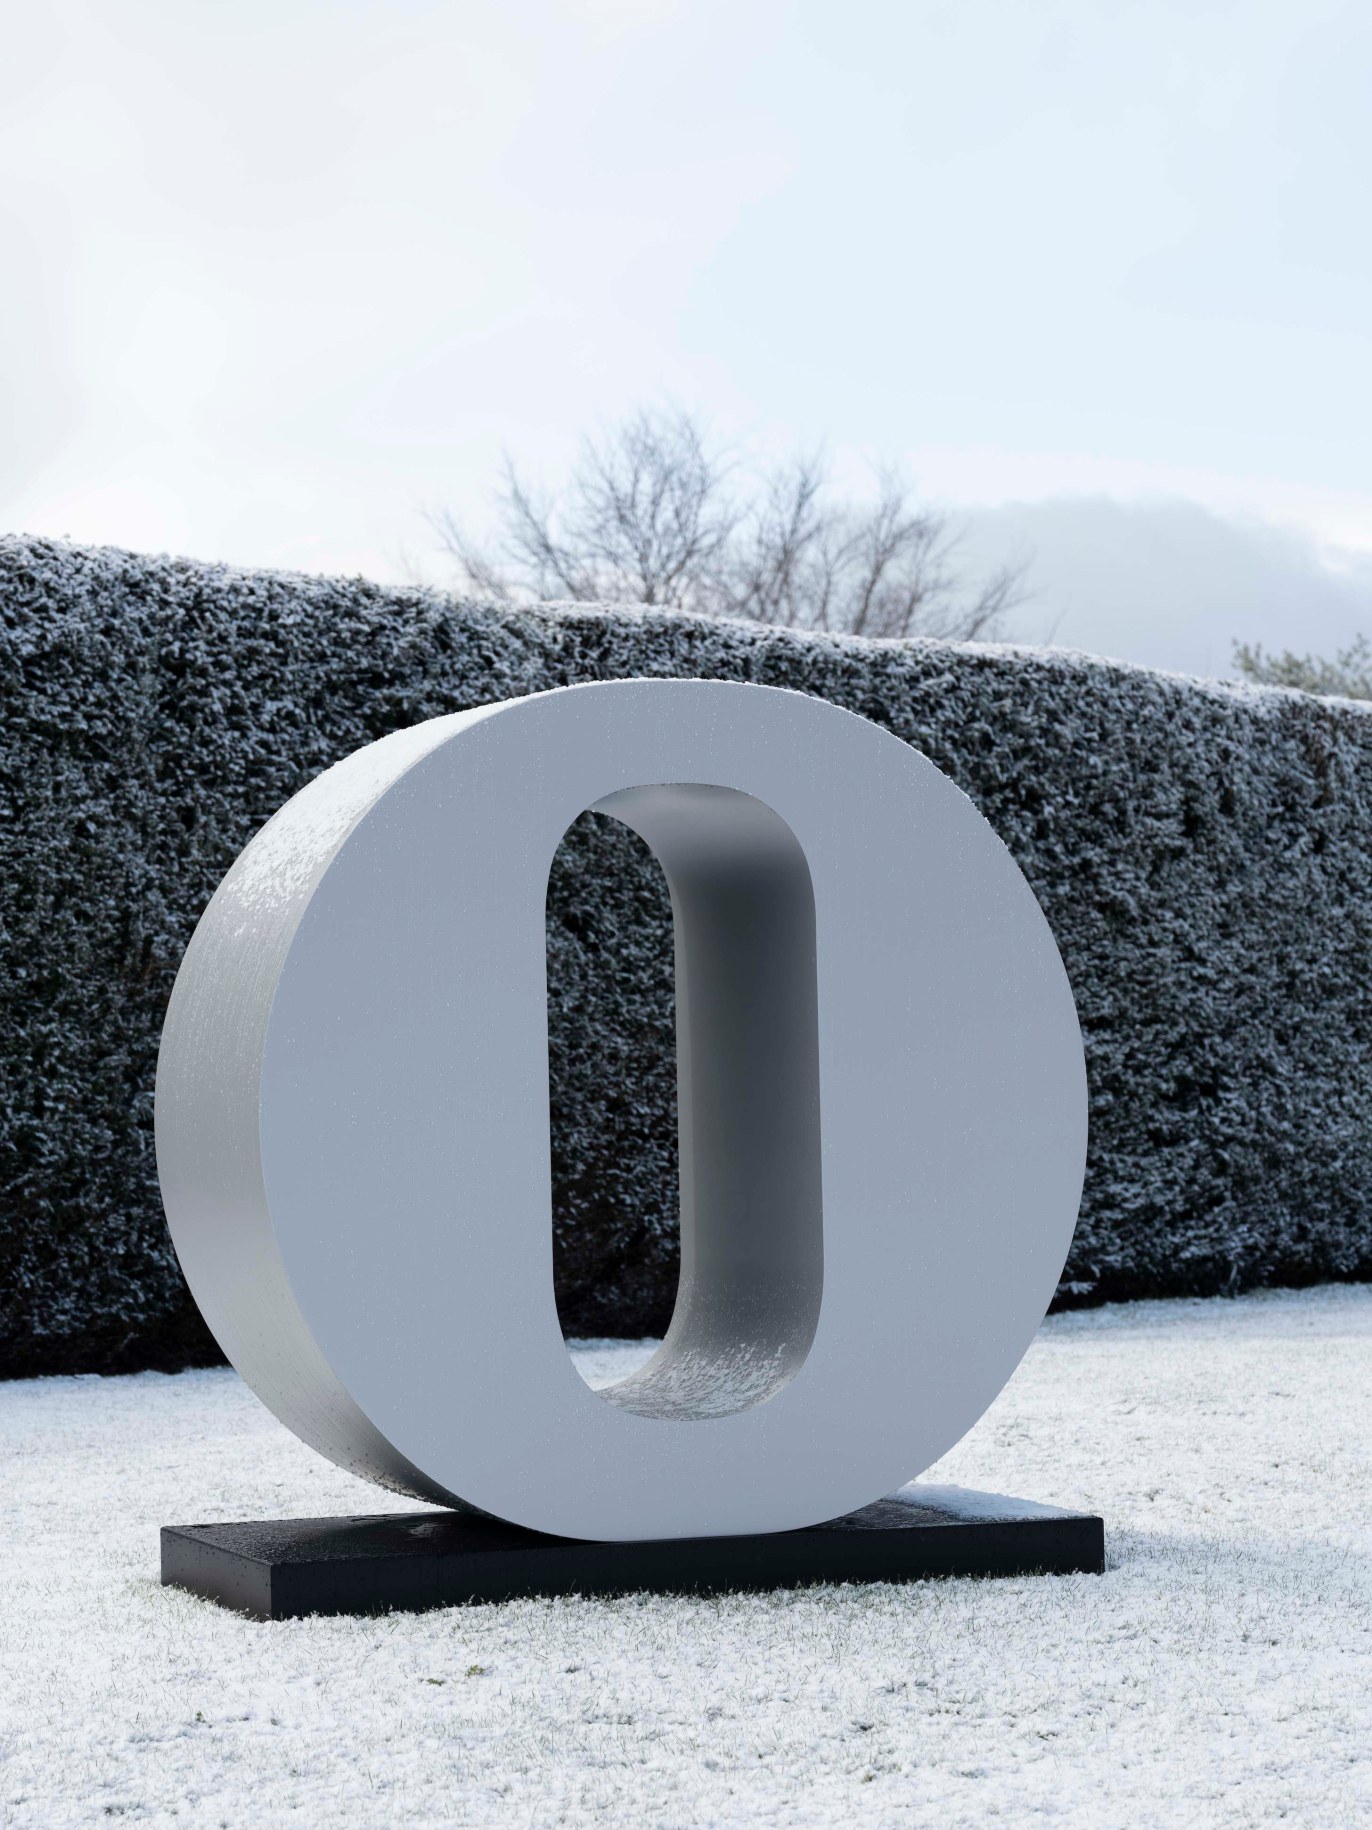 Indiana's gray polychrome sculpture of the number ZERO at Yorkshire Sculpture Park